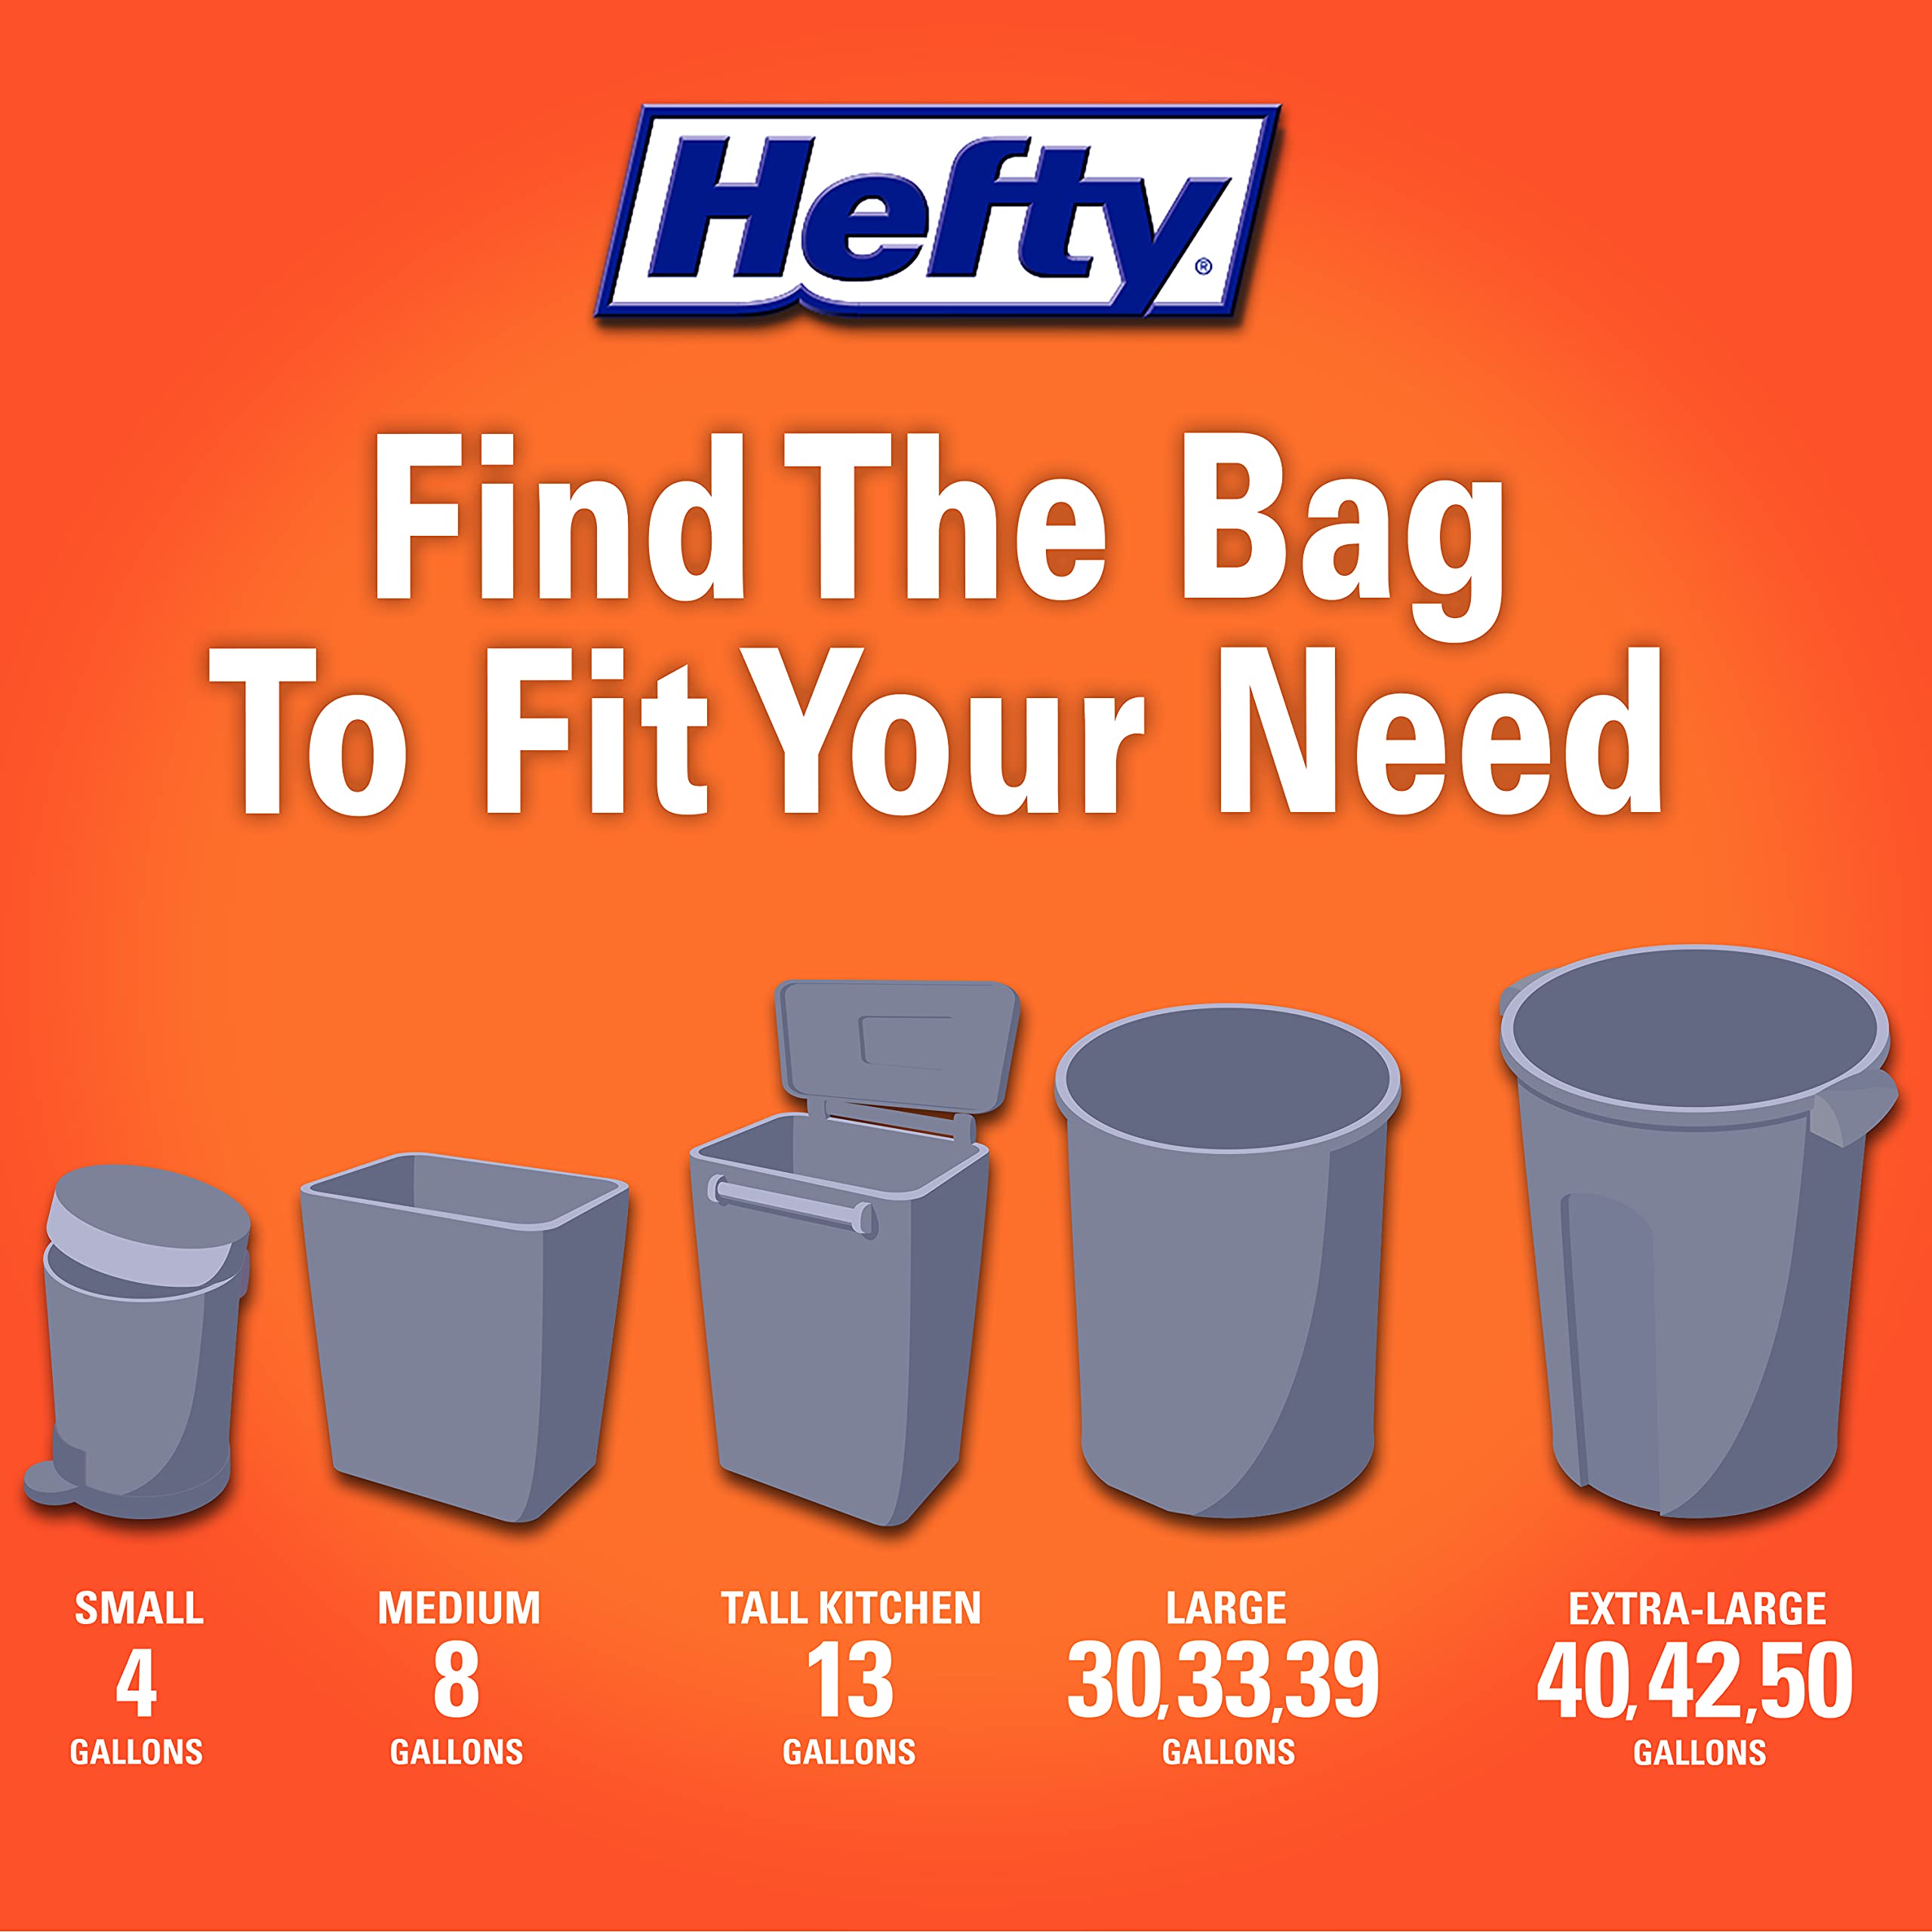 Hefty Flap Tie Small Trash Bags - Clean Burst, 4 Gallon, 312 Total,26 Count (Pack of 12)